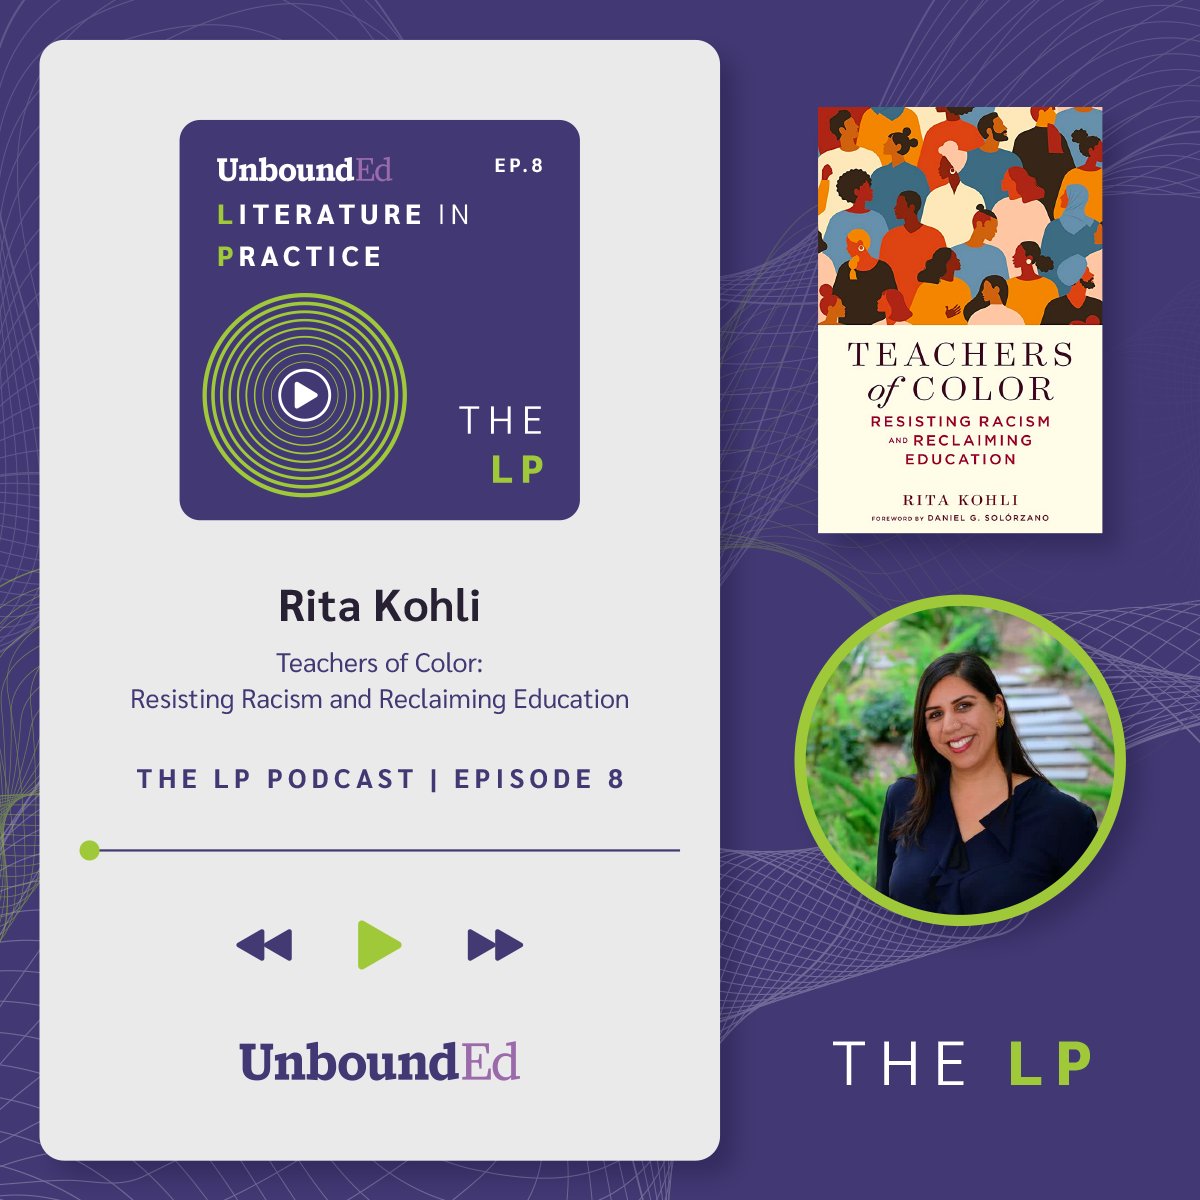 Teachers of color must THRIVE as educators, not SURVIVE as educators. On Episode 8 @kohli_rita and I discuss her book Teachers of Color (published by @Harvard_Ed_Pub) and the surviving and thriving experience! Full convo: tinyurl.com/2ytza2fm #equity #education